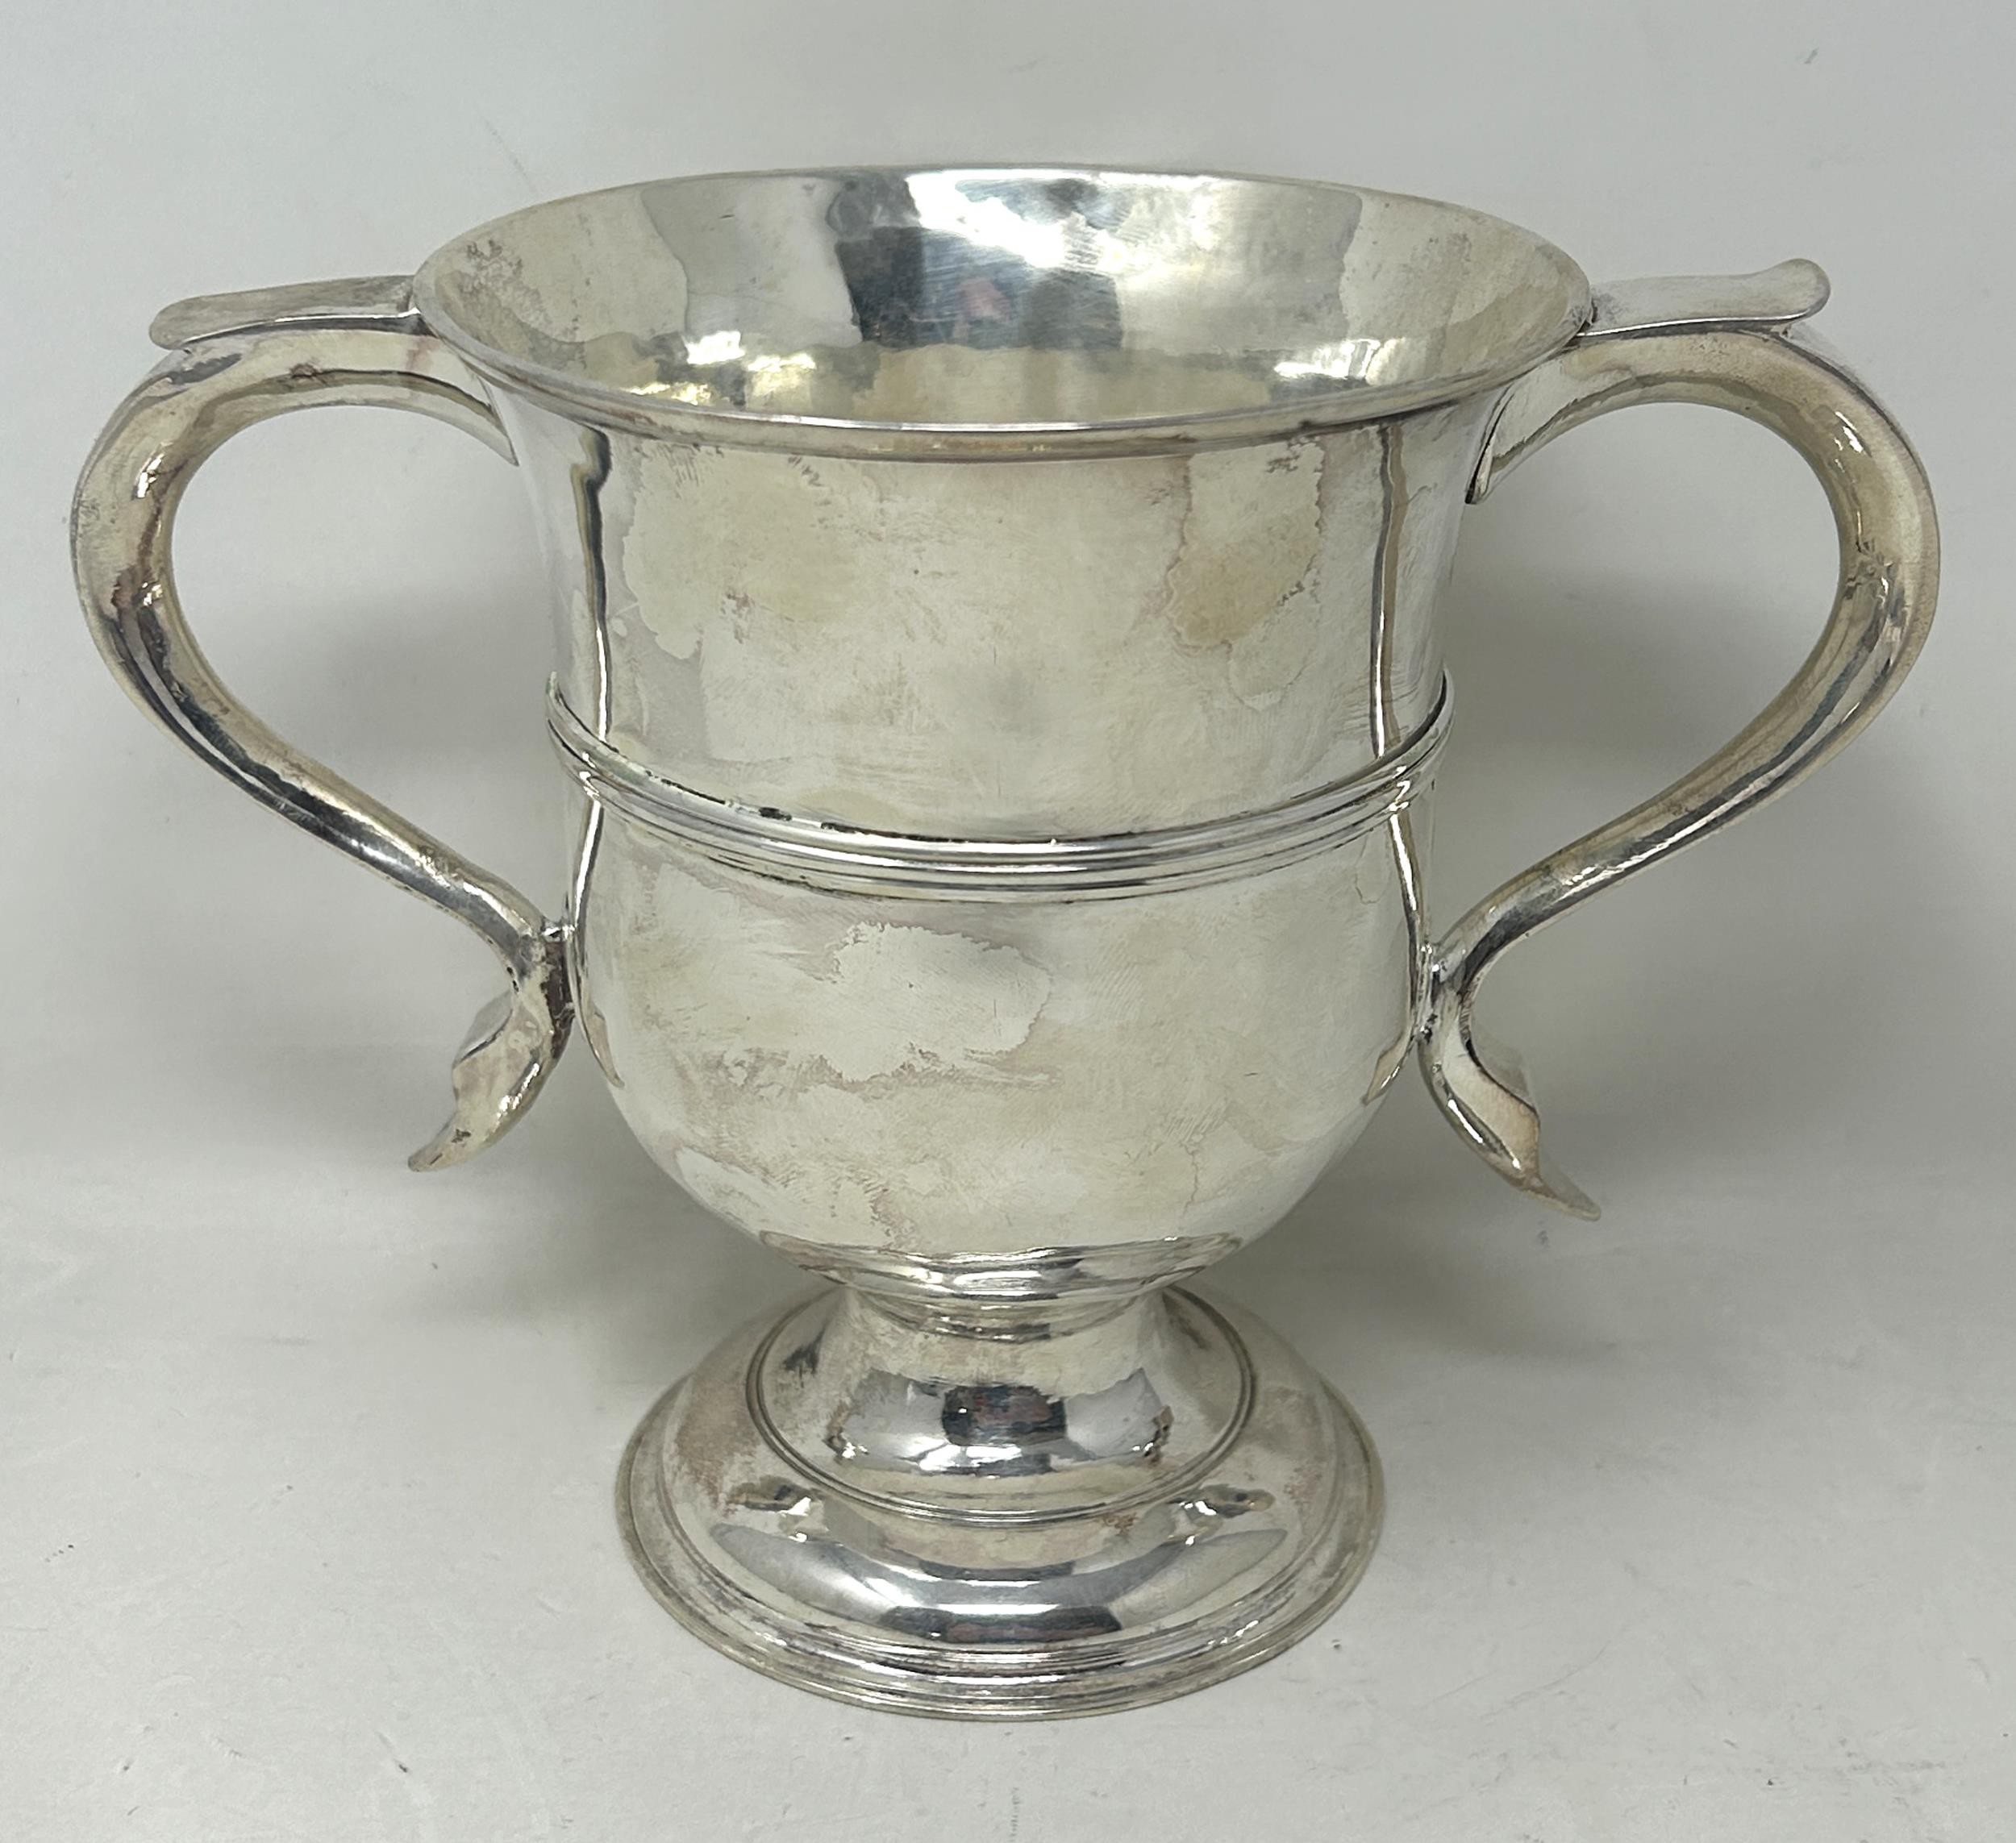 A George III silver two handled cup, London 1770, 11.3 ozt